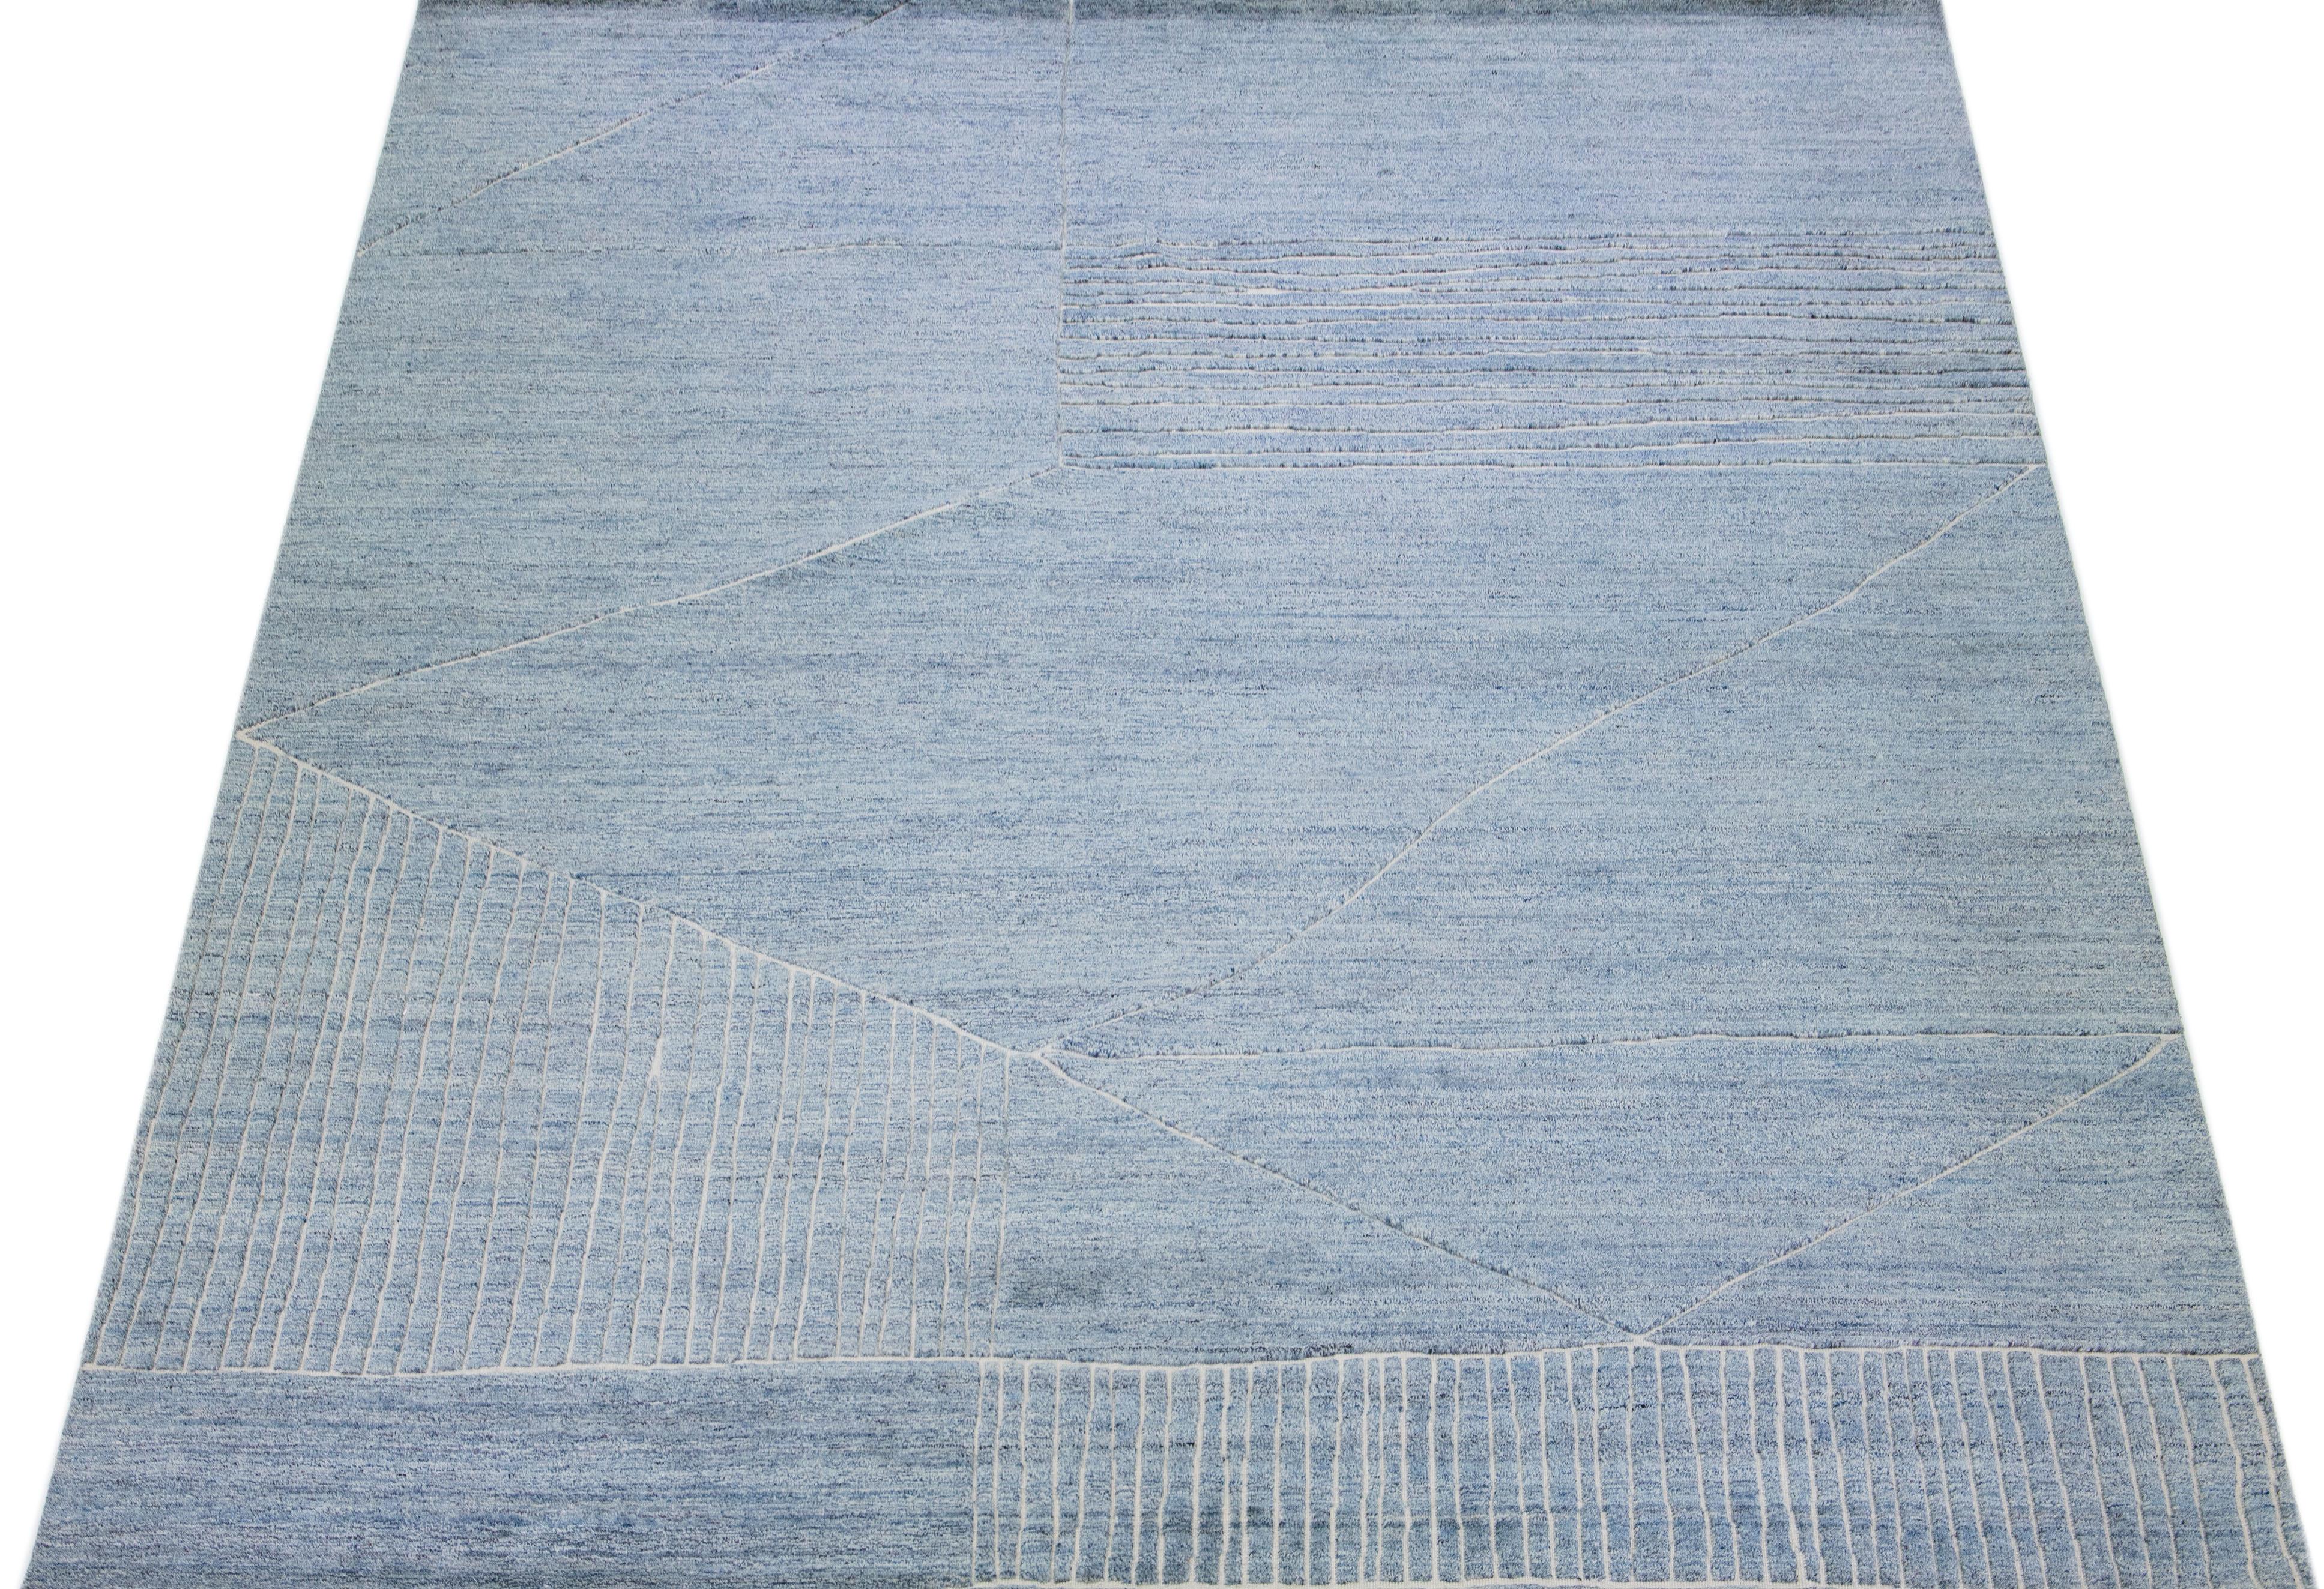 Beautiful modern Moroccan-style hand-knotted wool rug with a light blue color field. This rug is part of our Apadana's Safi Collection and features a geometric design in white.

This rug measures: 12'1